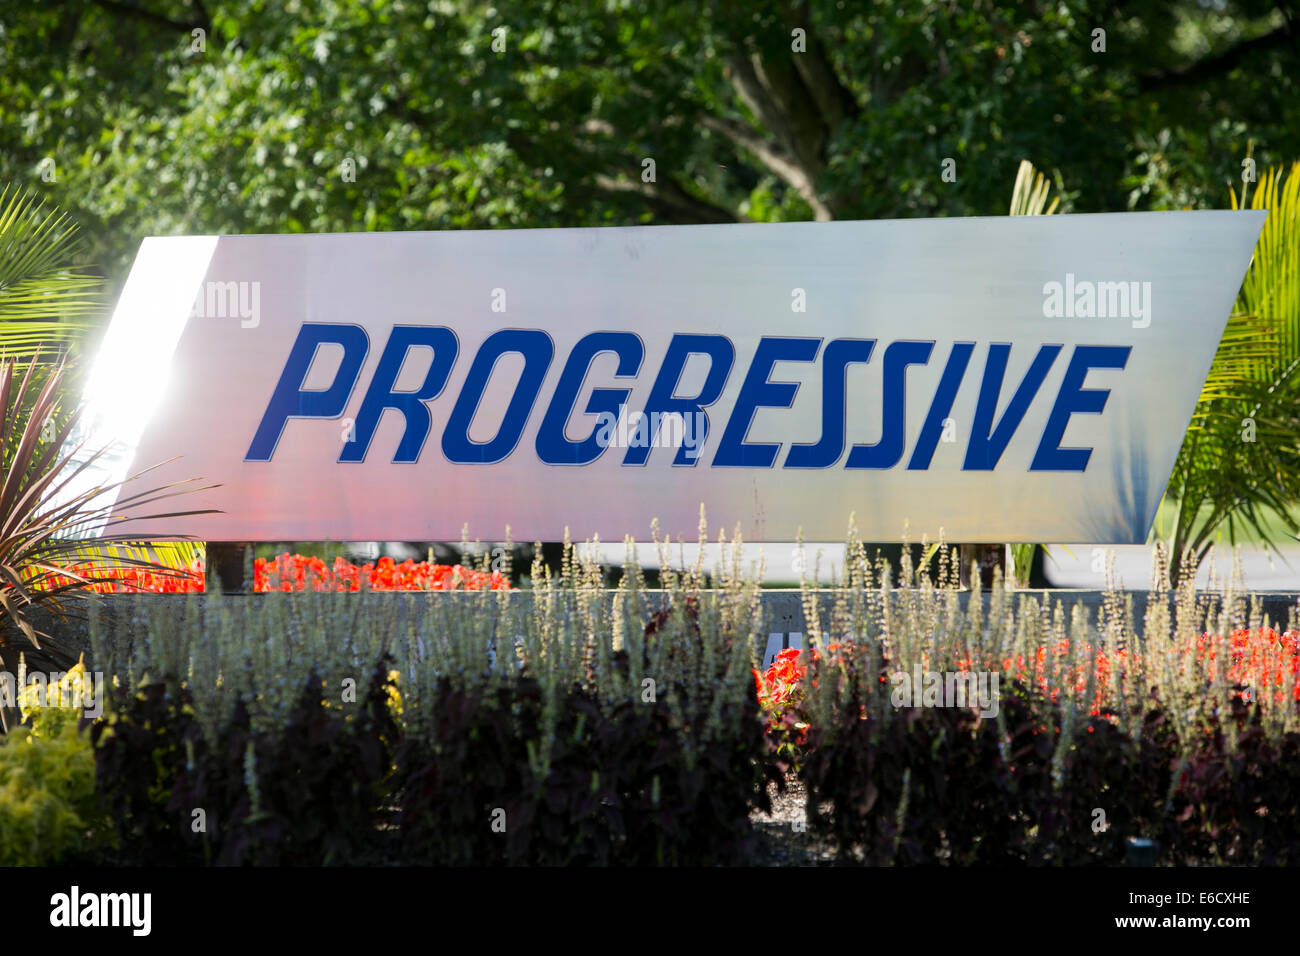 A facility occupied by the Progressive Corporation in Mayfield, Ohio. Stock Photo